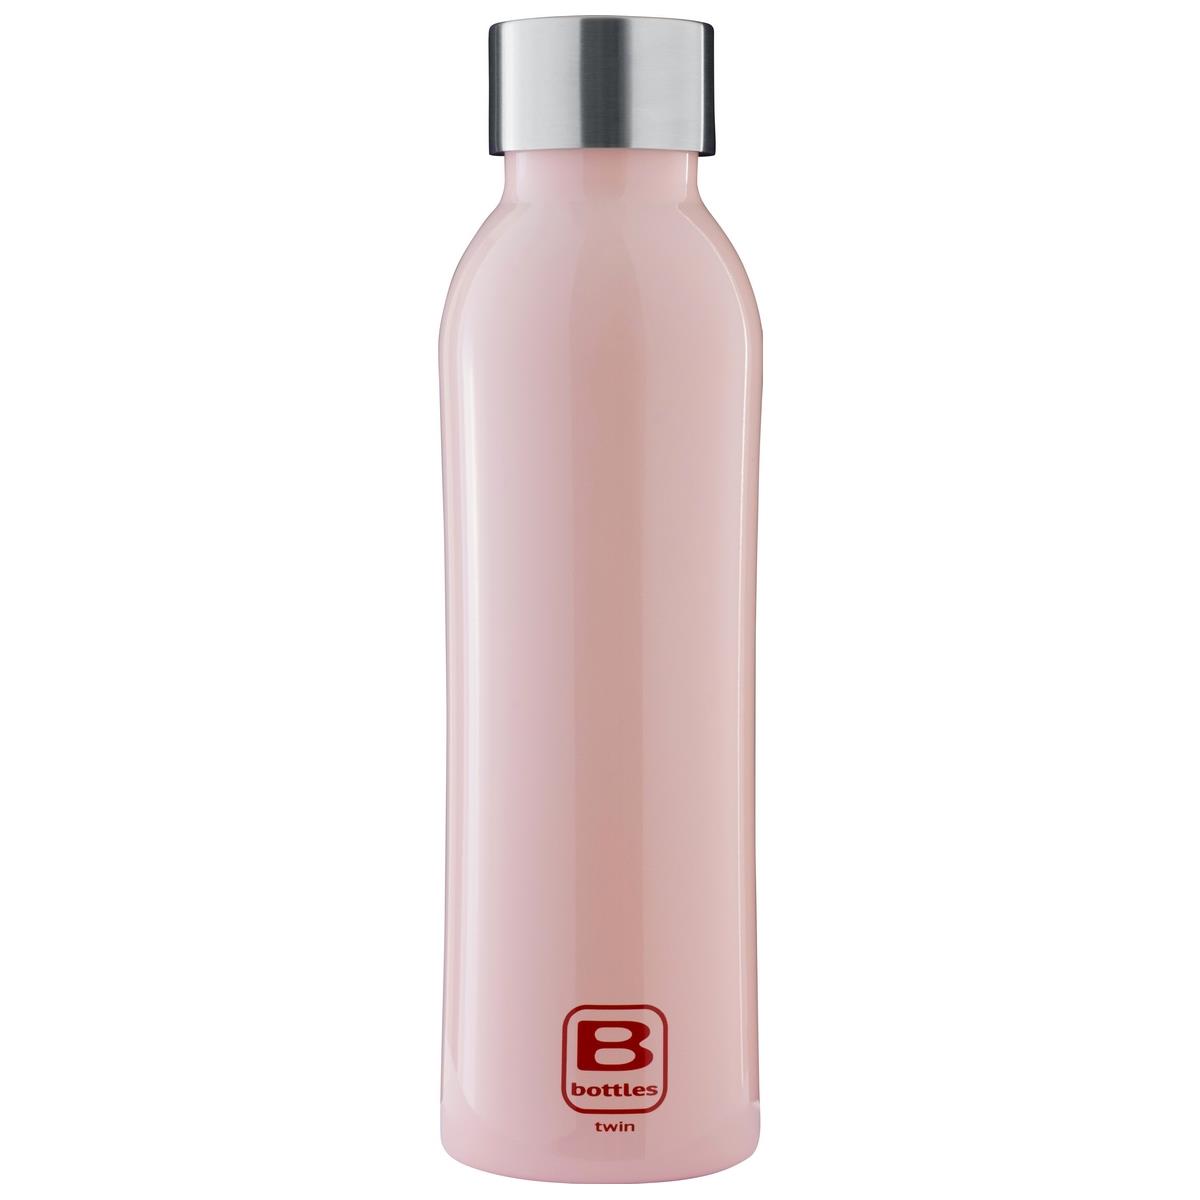 B Bottles Twin - Pink - 500 ml - Double wall thermal bottle in 18/10 stainless steel